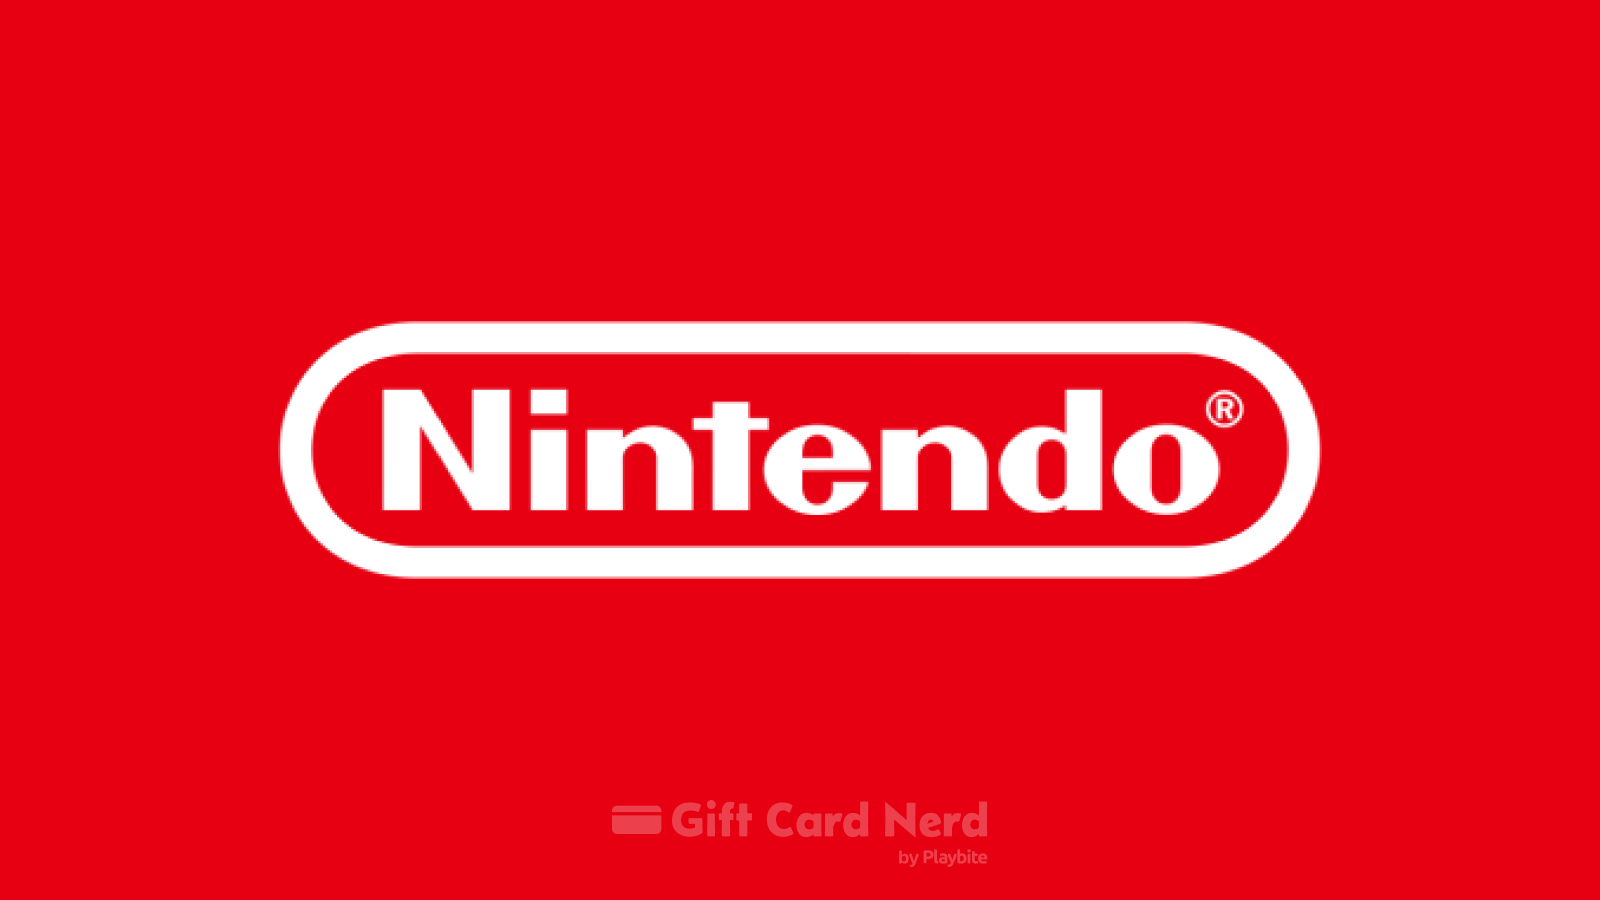 Can I Use a Nintendo Gift Card on Roblox?